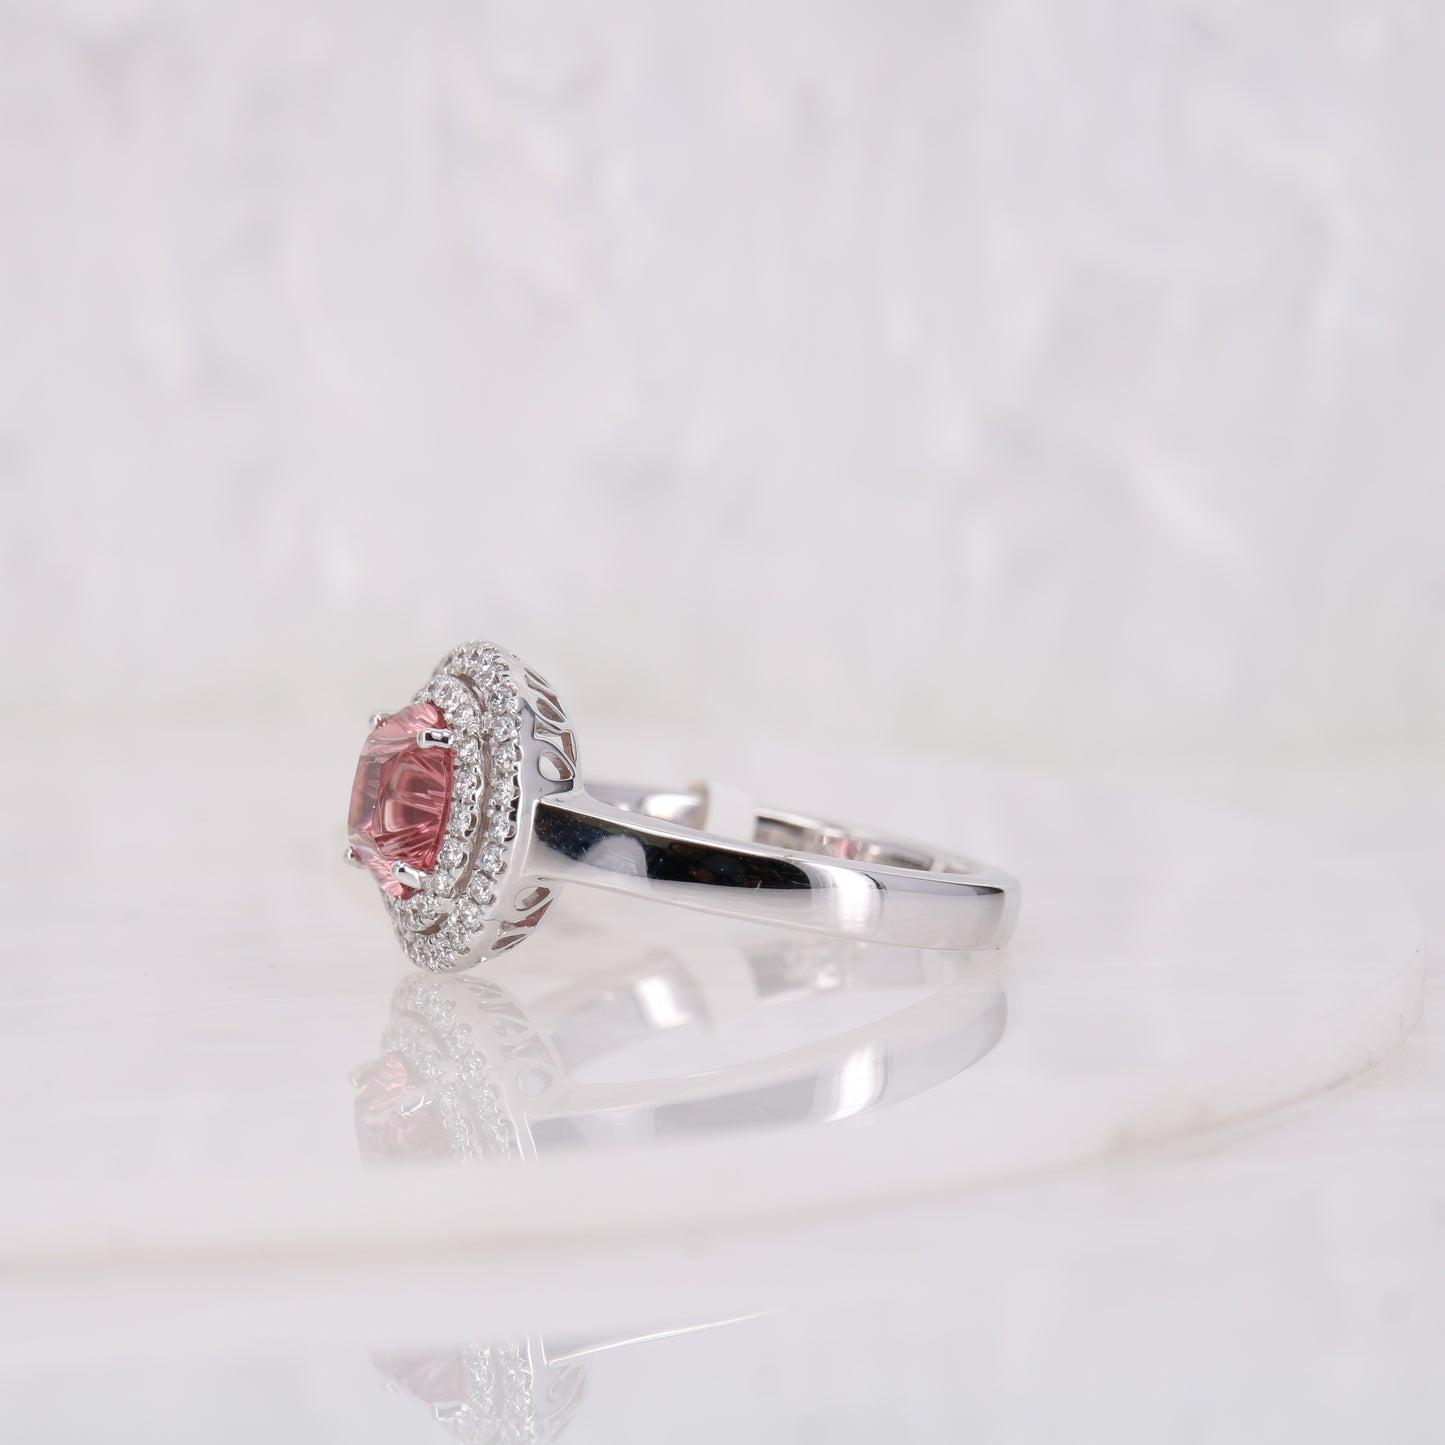 Pink Tourmaline and Diamond ring. Featuring a striking faceted 1.49ct round brilliant cut carved pink tourmaline and complimented by a double halo of diamonds.